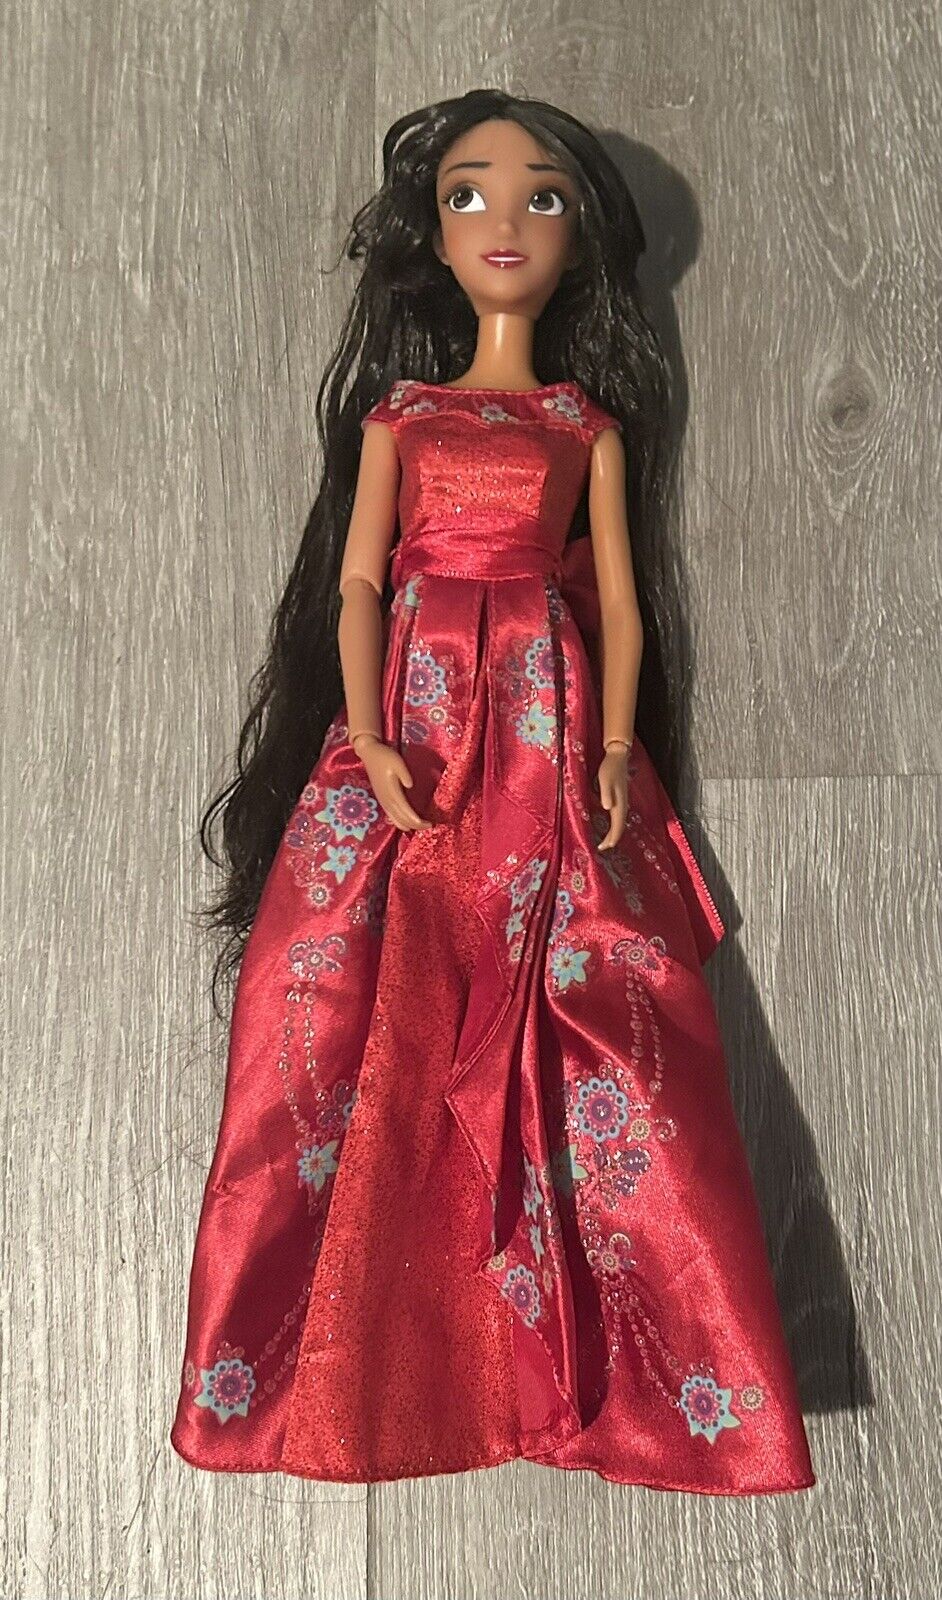 Disney Store Limited Edition Princess  Elena Of Avalor Doll Singing Working 